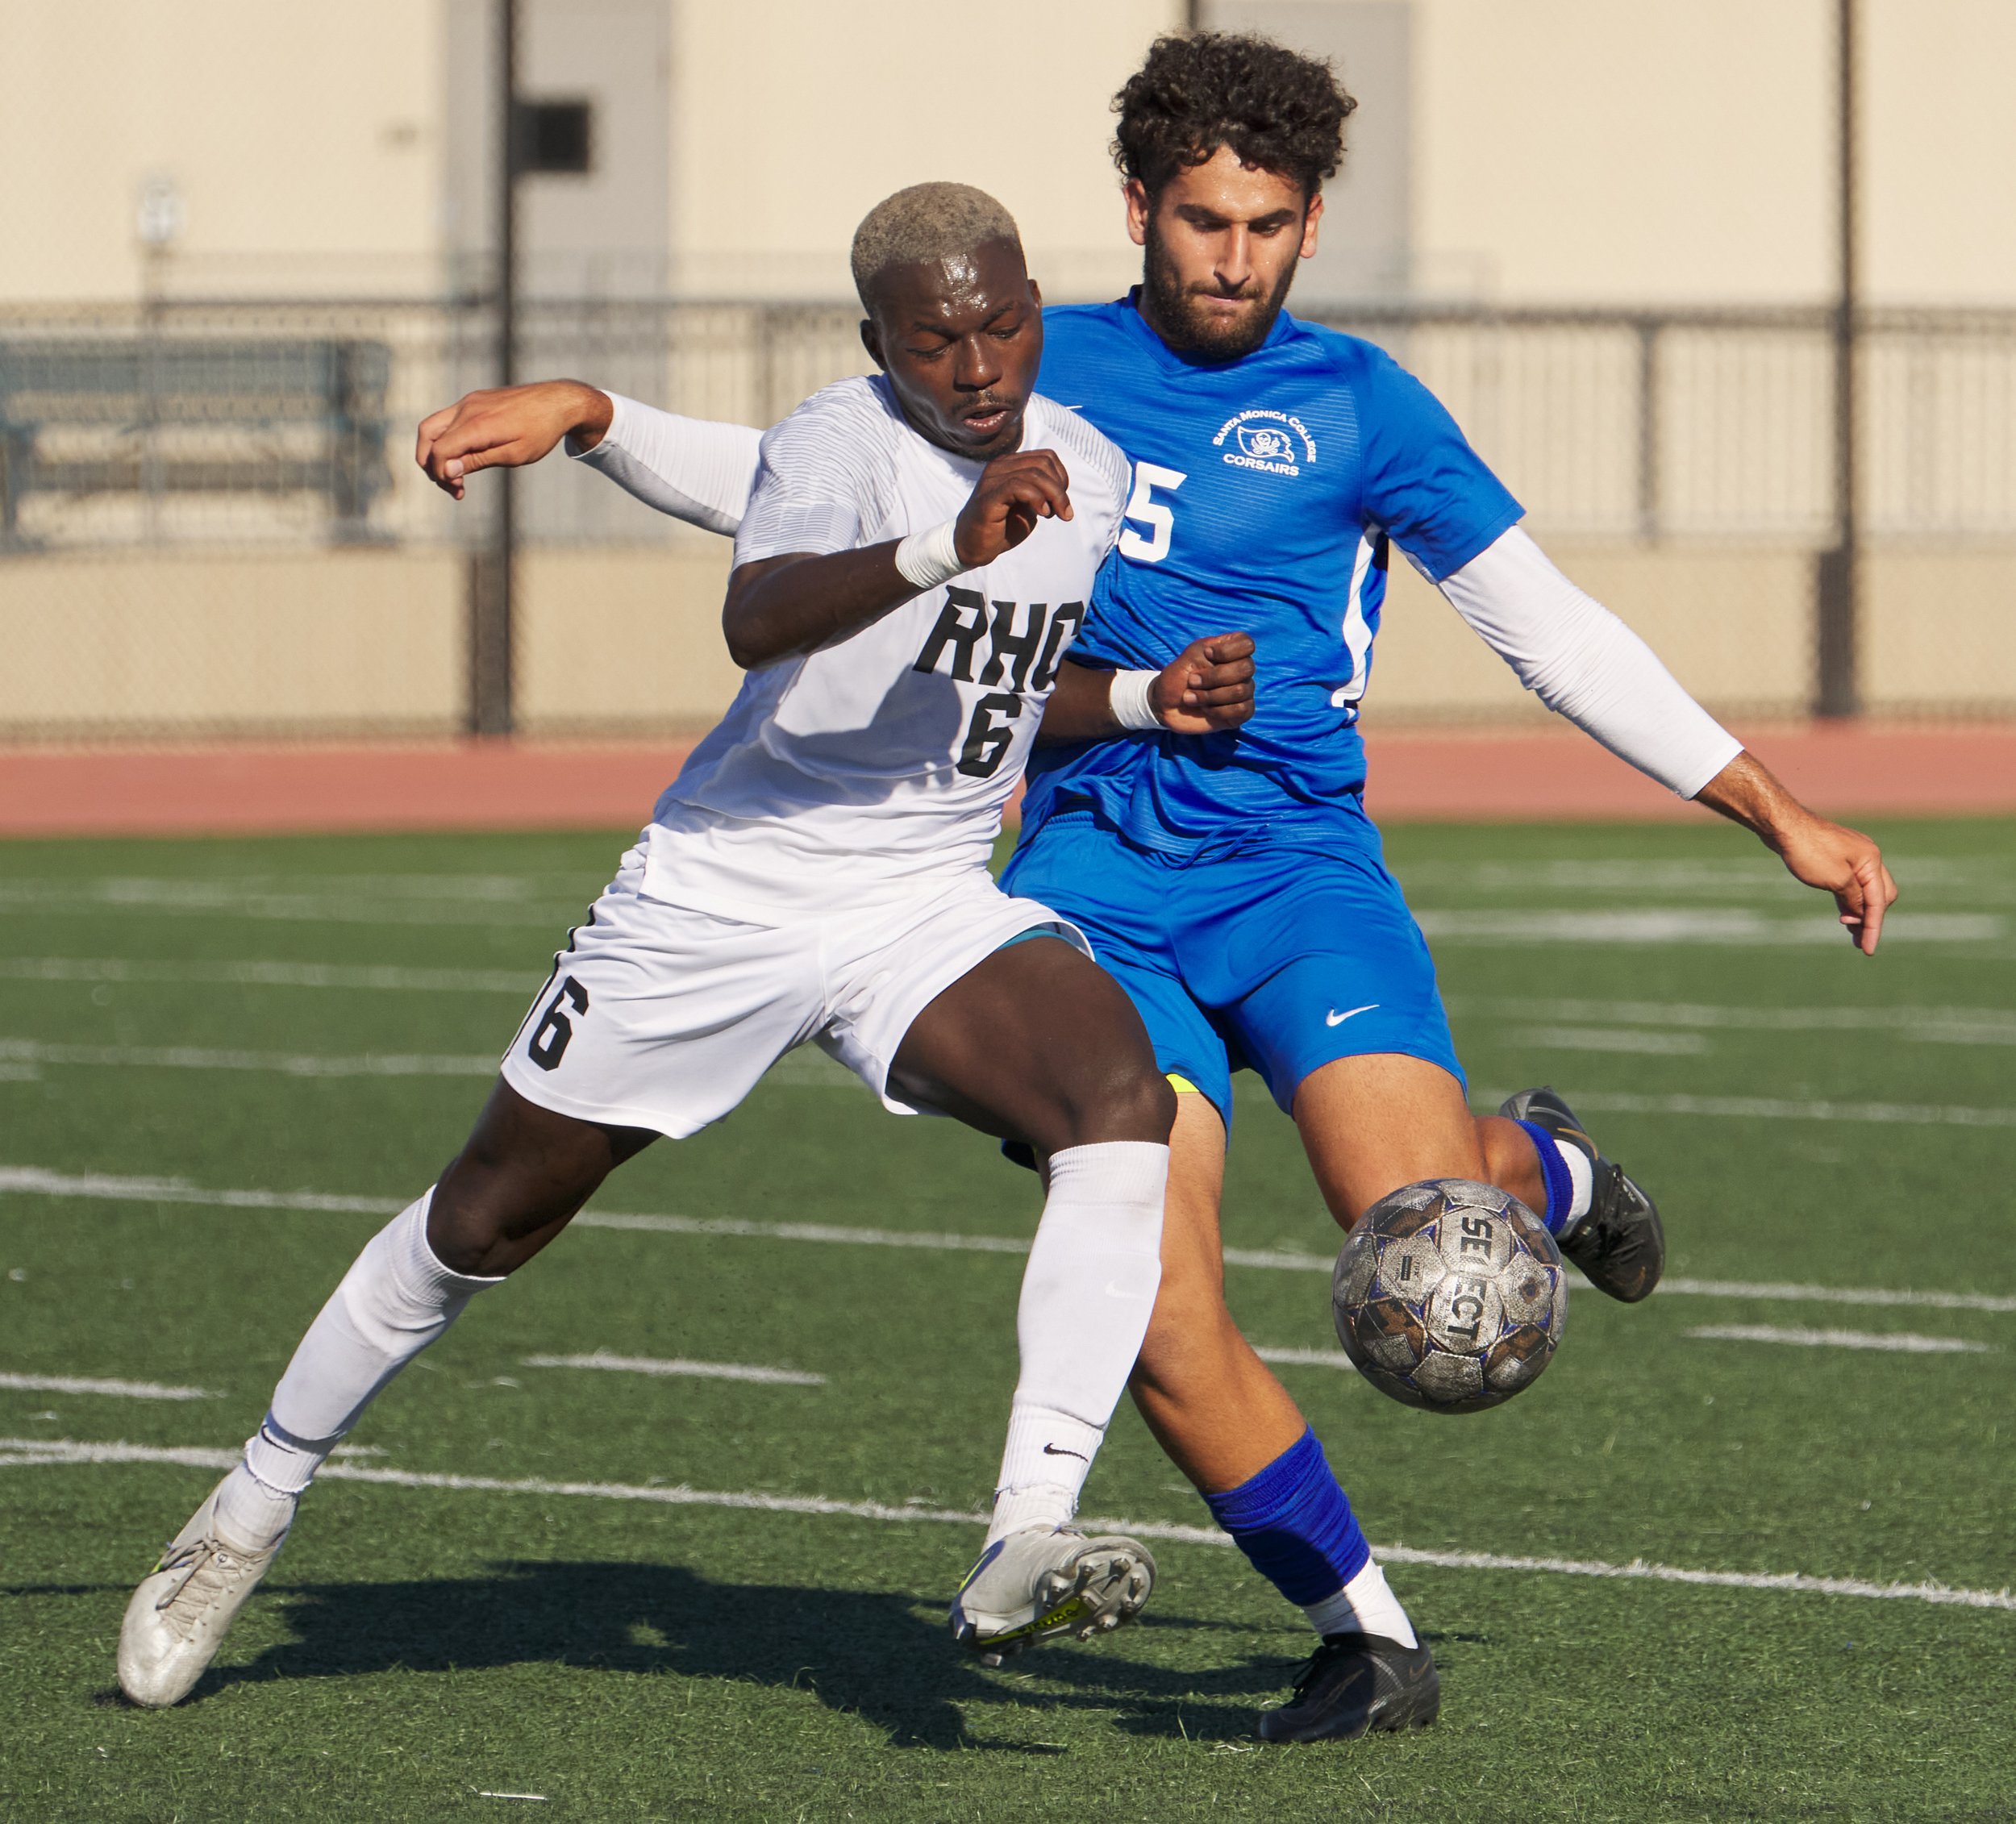  Santa Monica College Corsairs' Adam Abou-Hamad (right) and Rio Hondo College Roadrunners' Ebenezer Chinne (left) during the men's soccer match on Friday, Sept. 24, 2022, at Corsair Field in Santa Monica, Calif. The Corsairs won 2-1. (Nicholas McCall